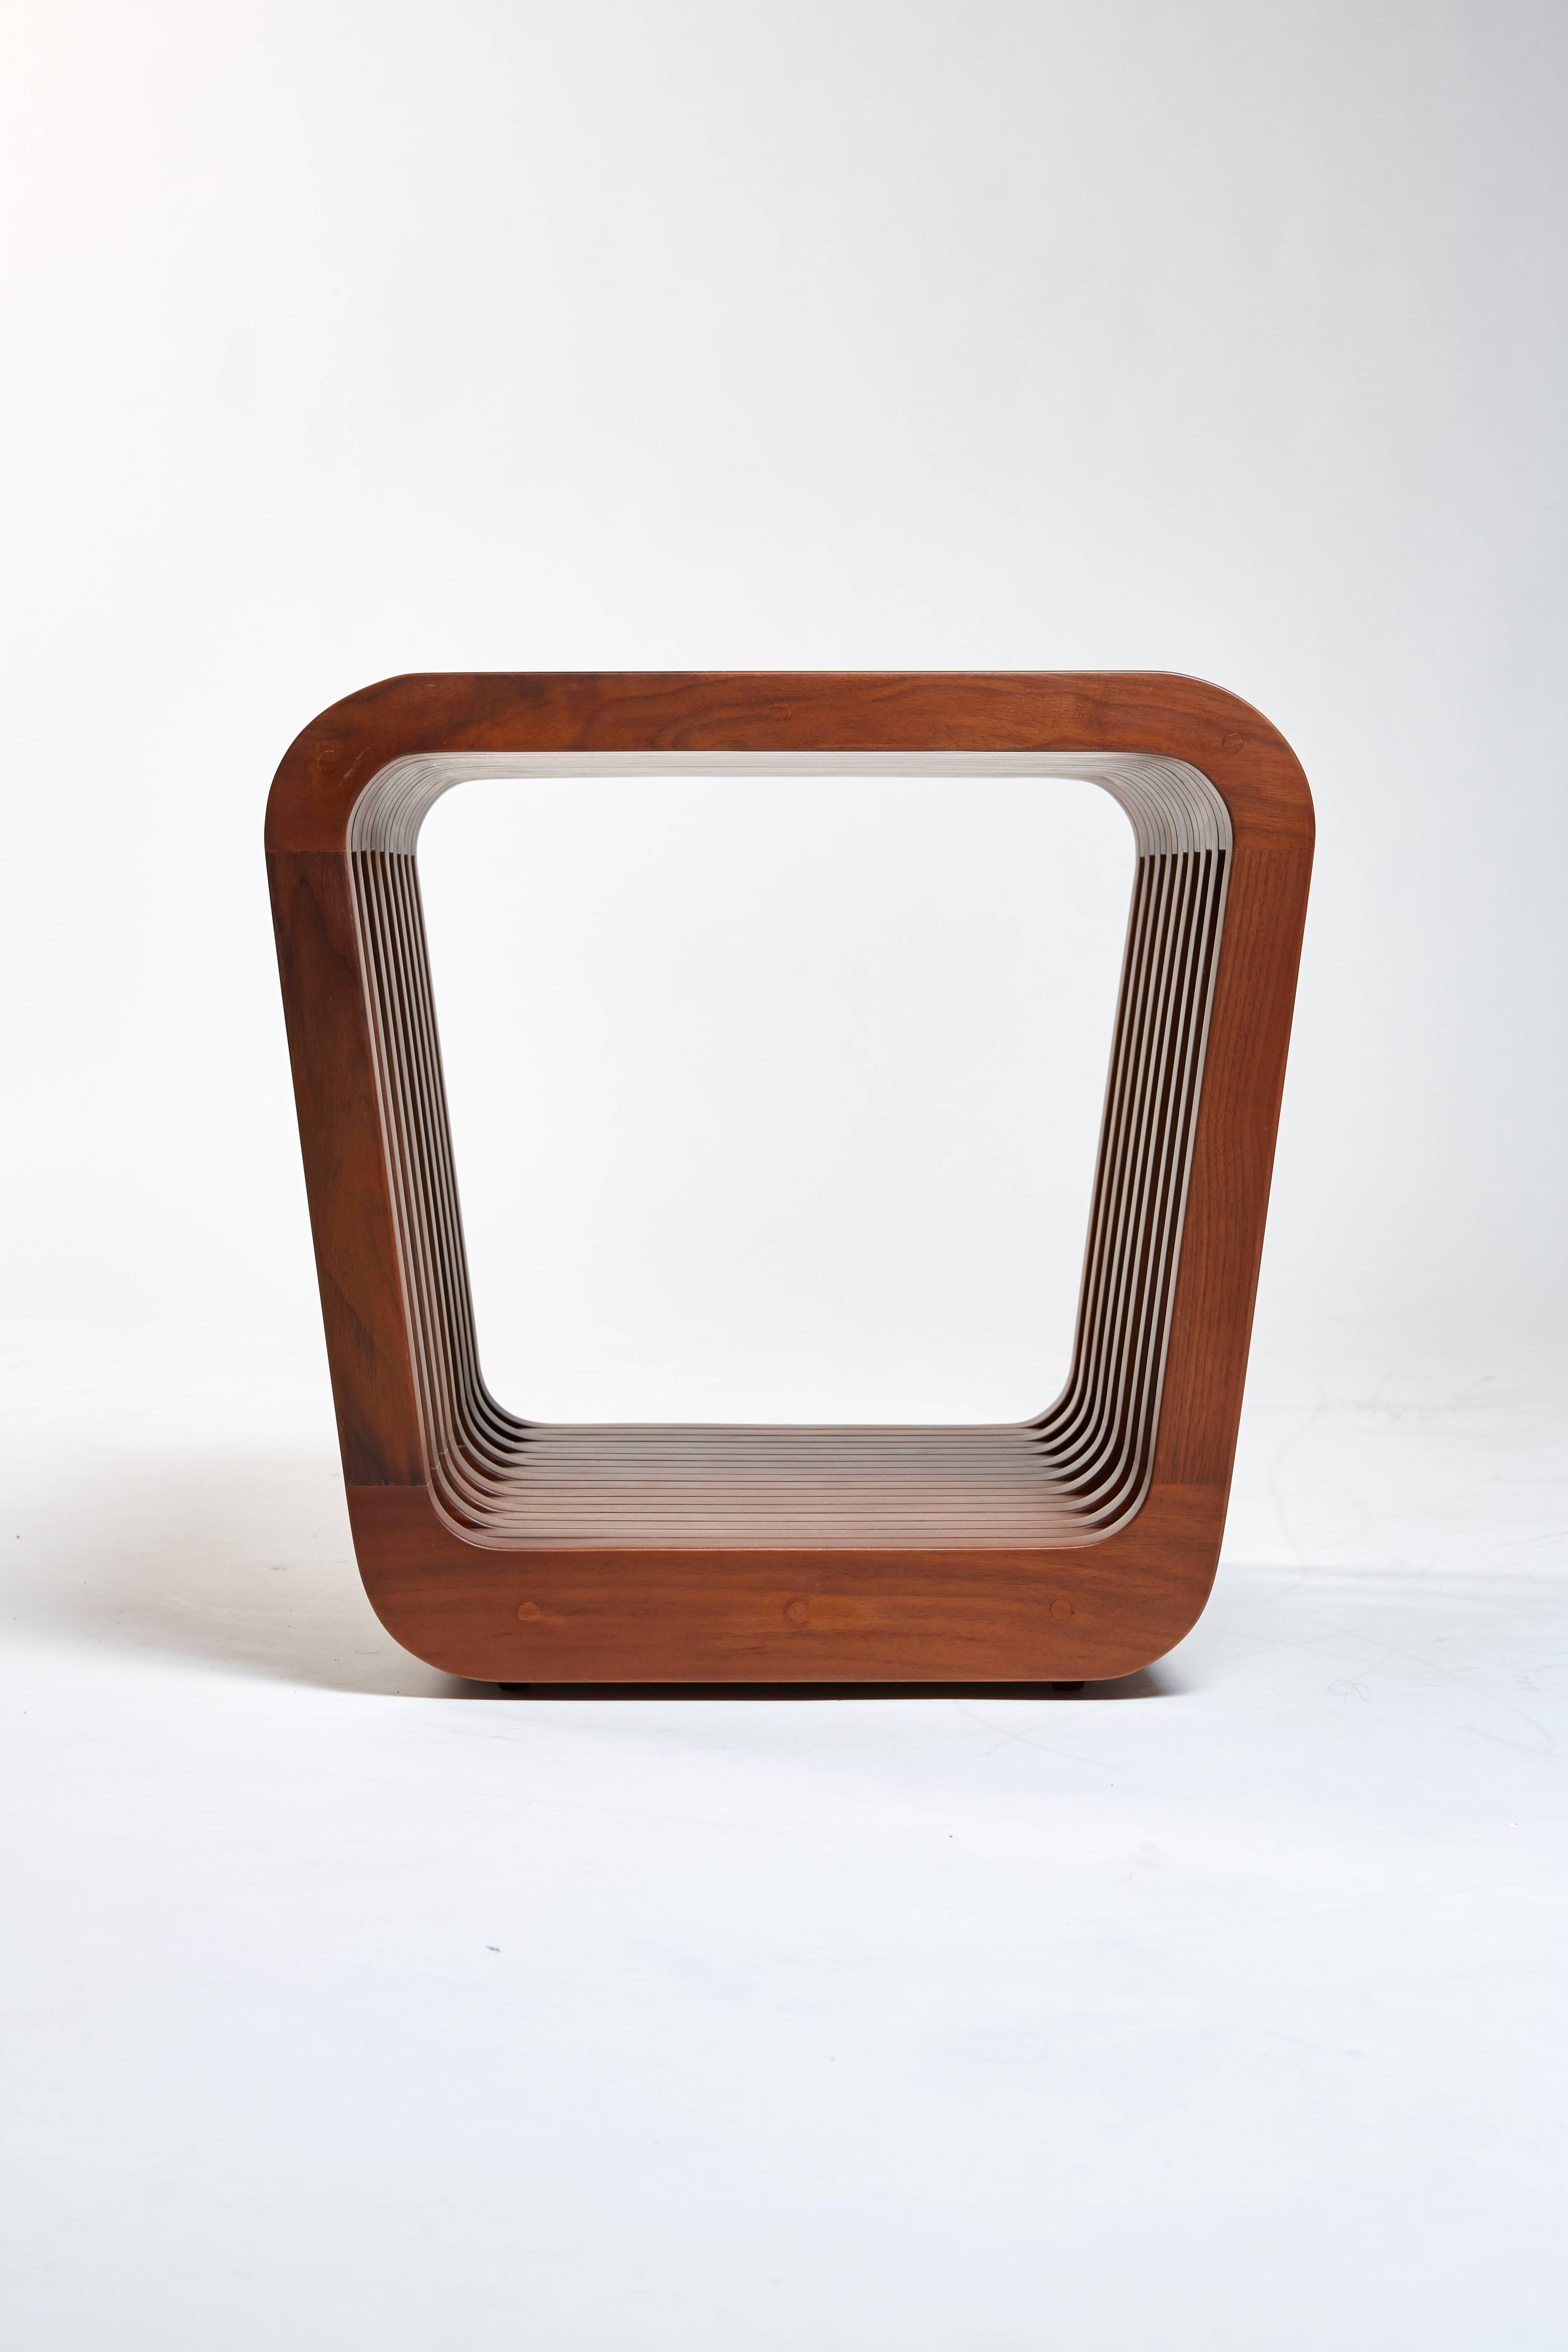 Vietnamese Stool or side Table, LINK by Reda Amalou, 2016, American Walnut For Sale